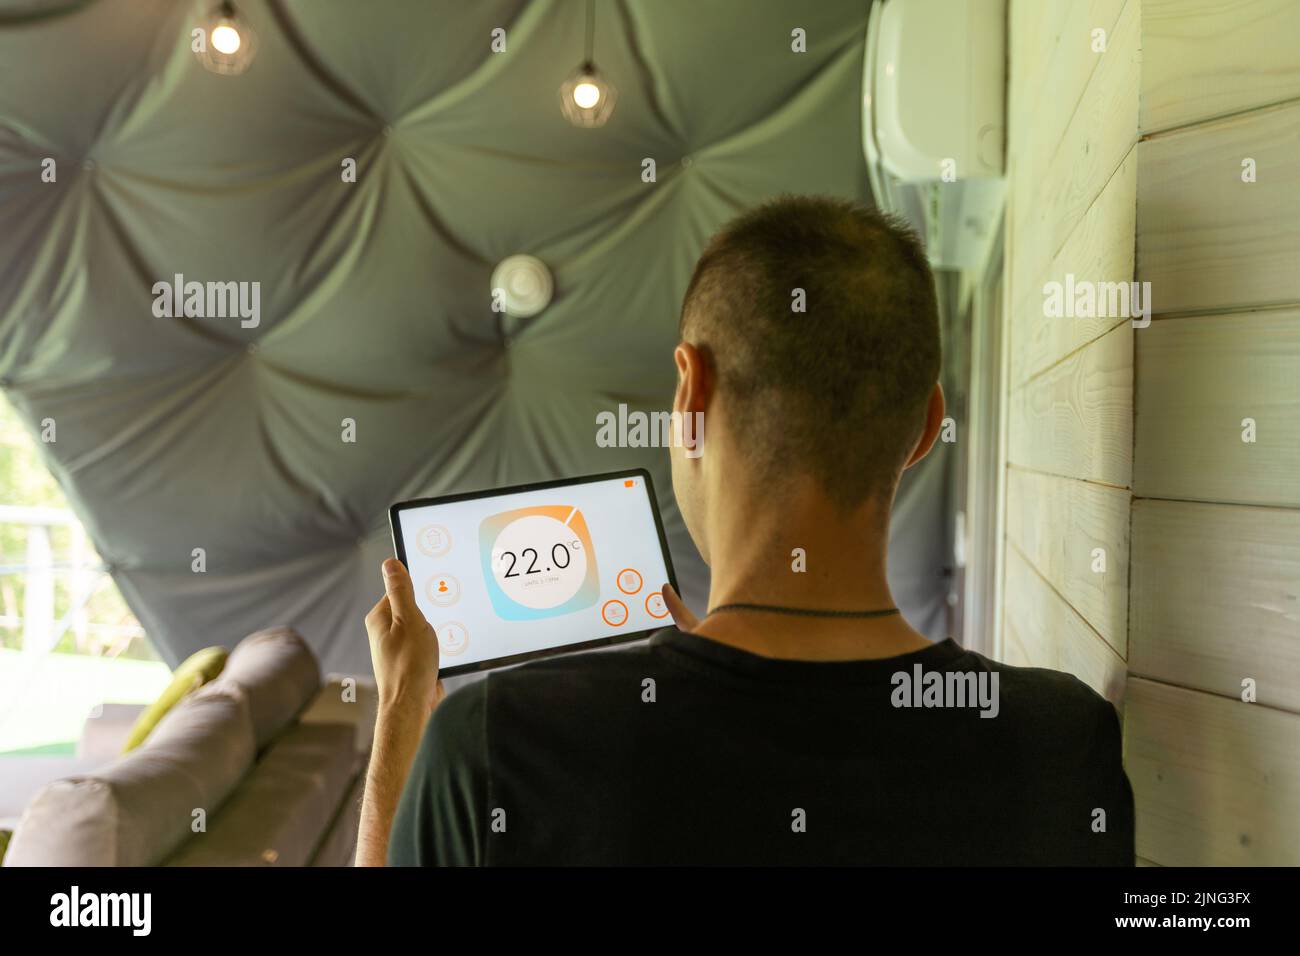 Smart home control on tablet. Interior of living room in the background Stock Photo